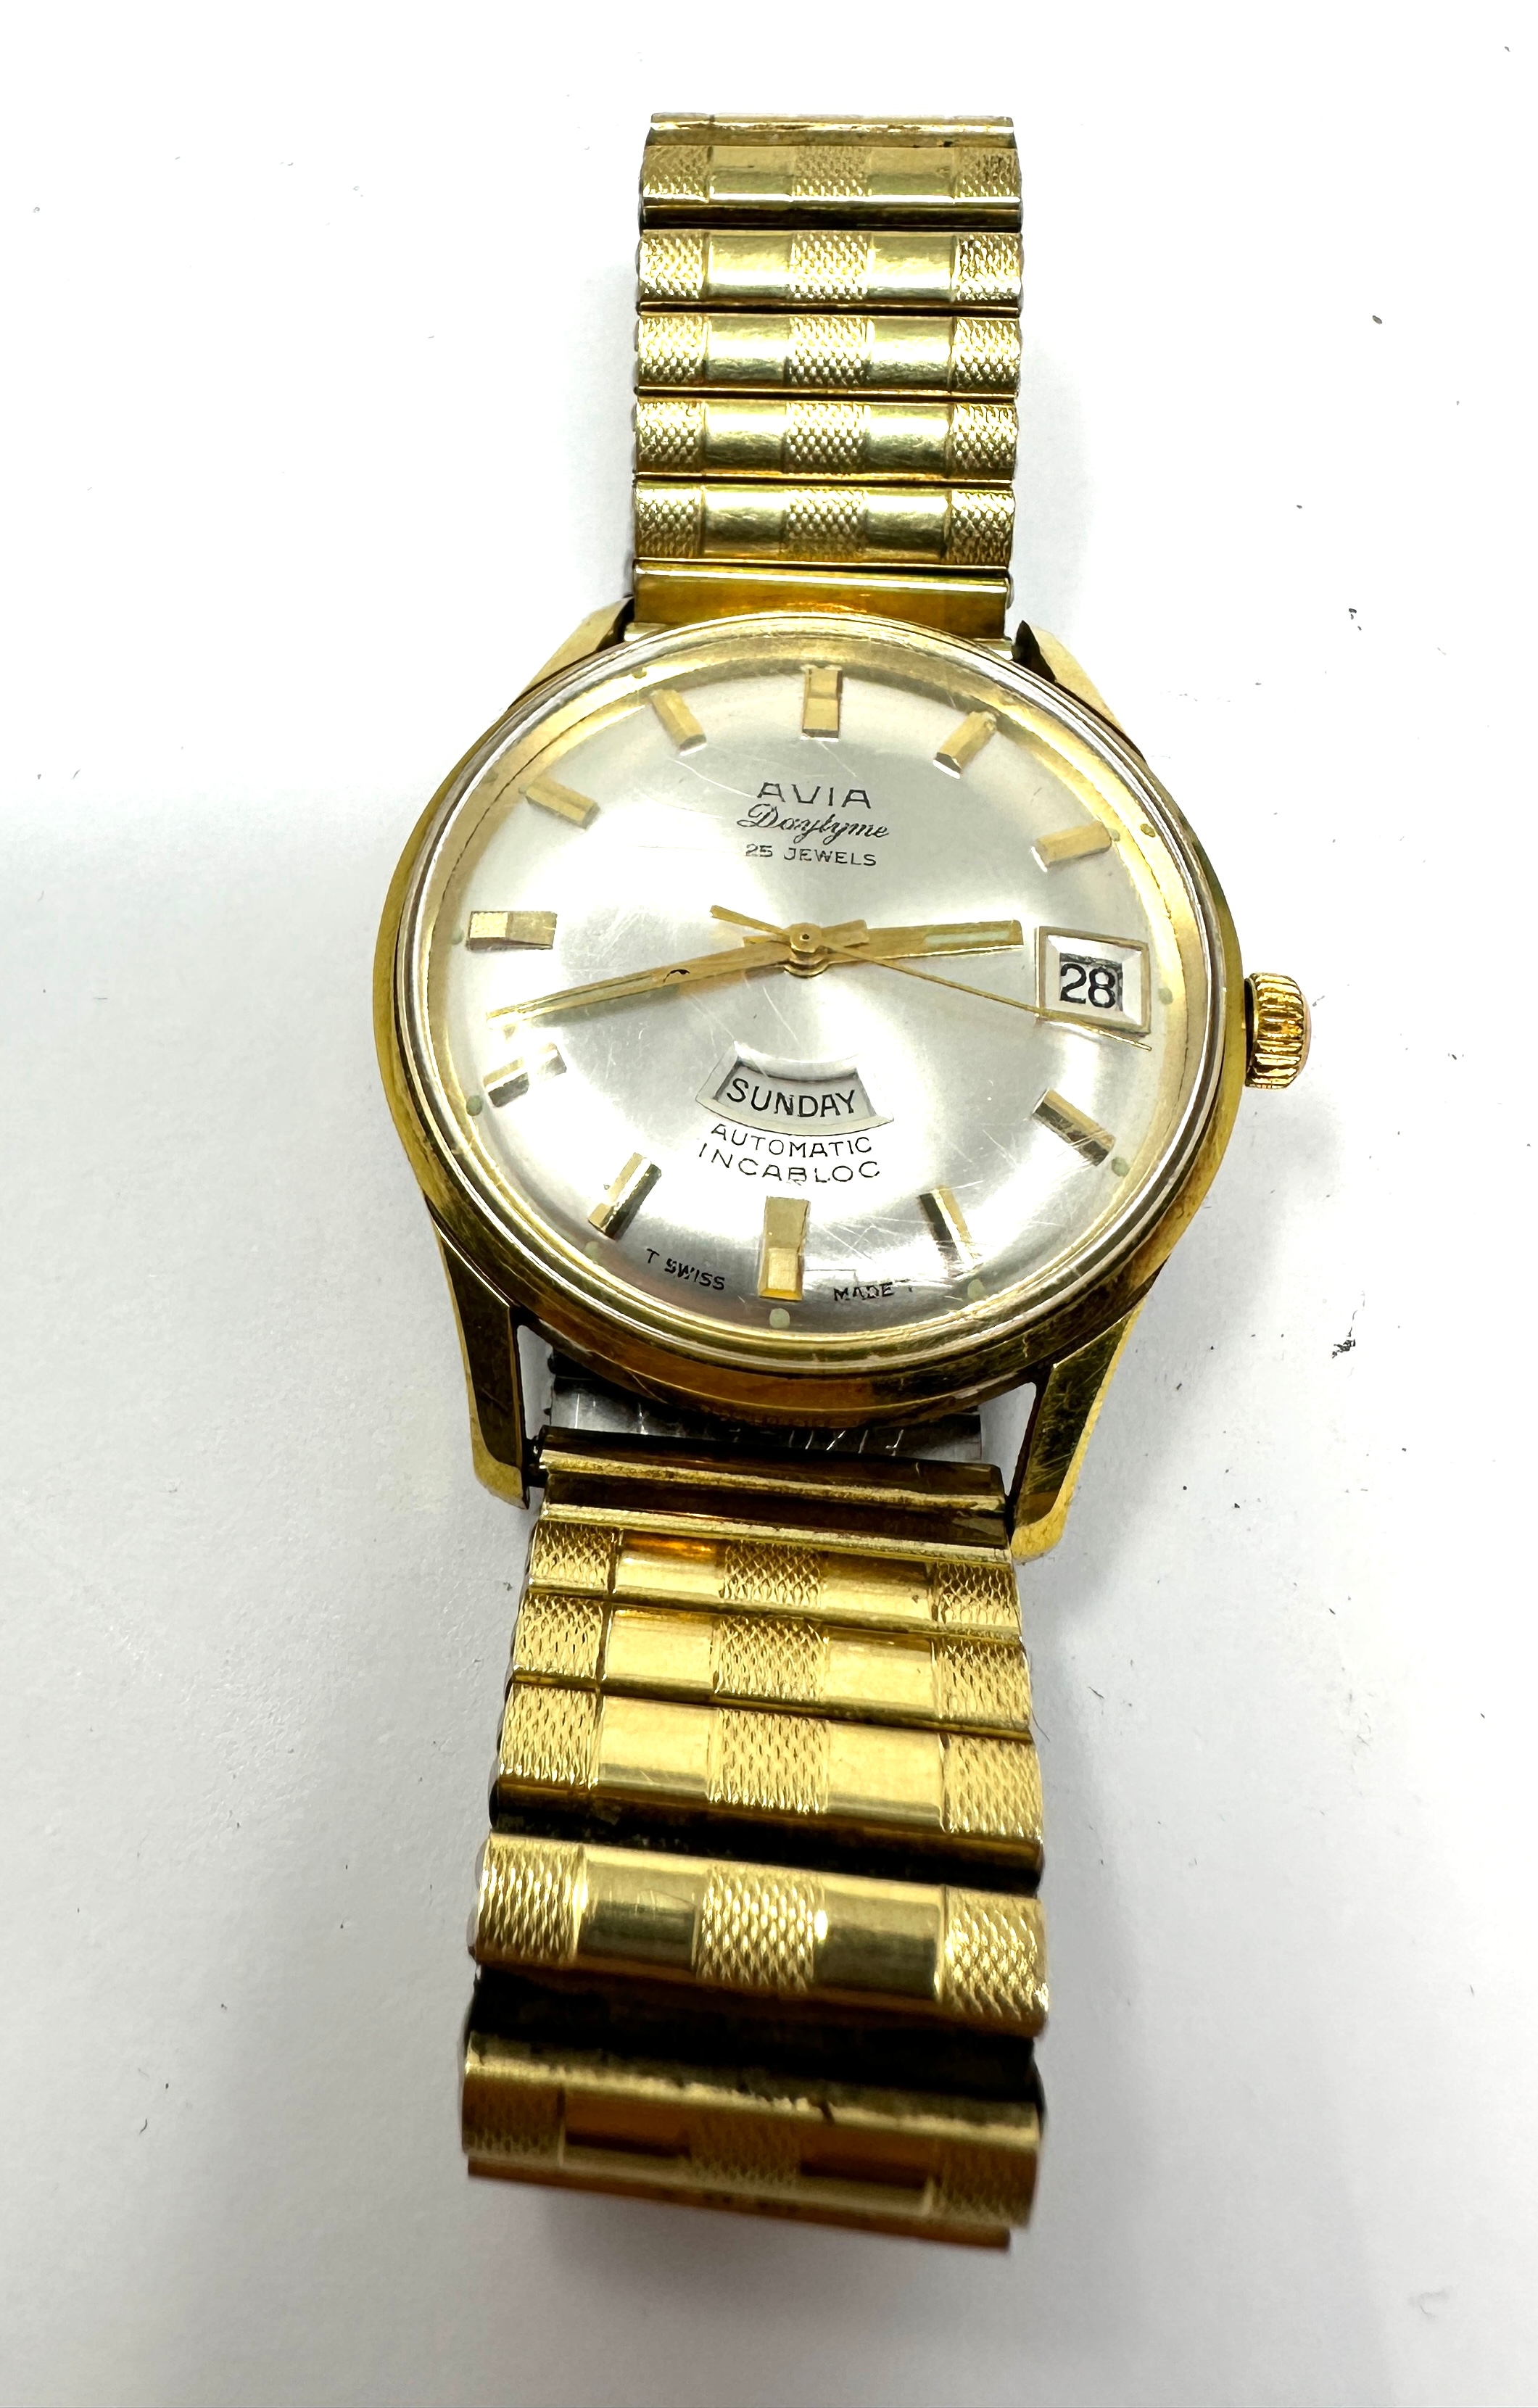 Vintage Avia Daytyme Automatic Day & Date Swiss Watch 25 Jewels the watch is ticking